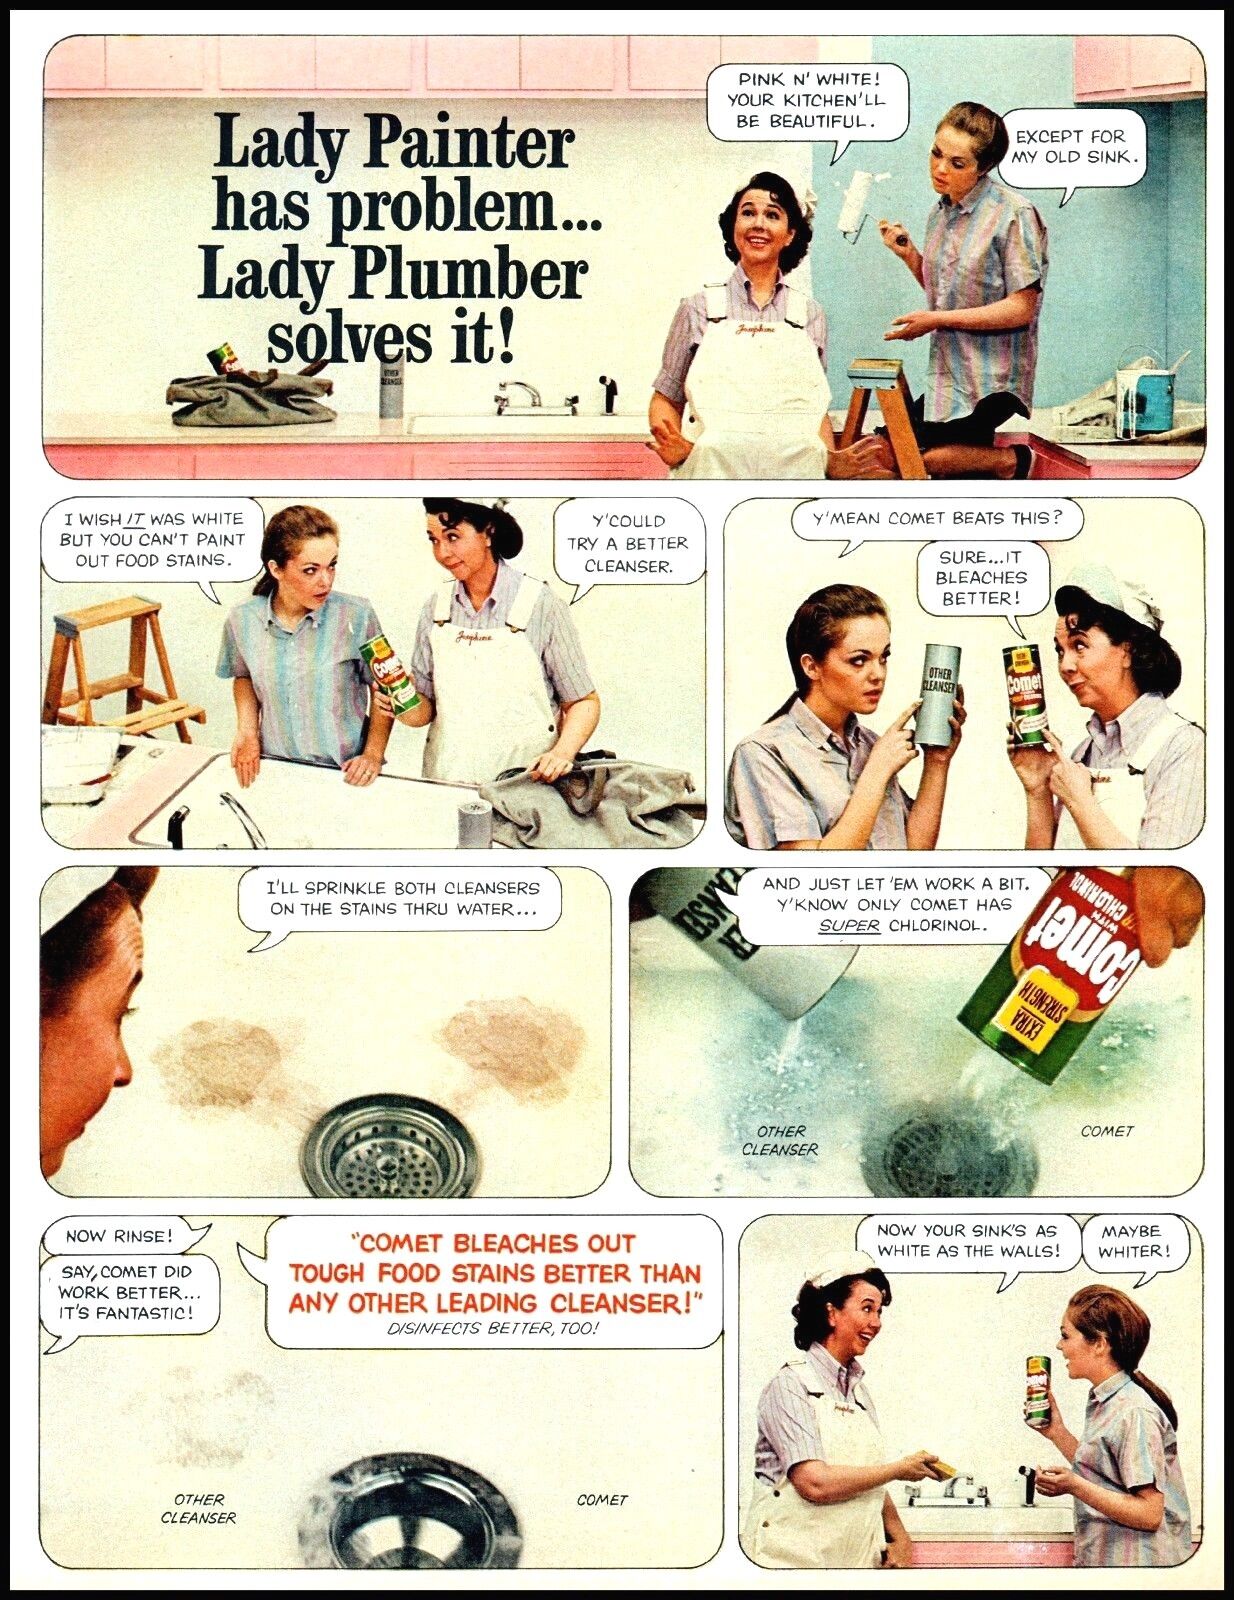 1968 Jane Withers Comet Josephine the Plumber vintage photo Print Ad  ADL13